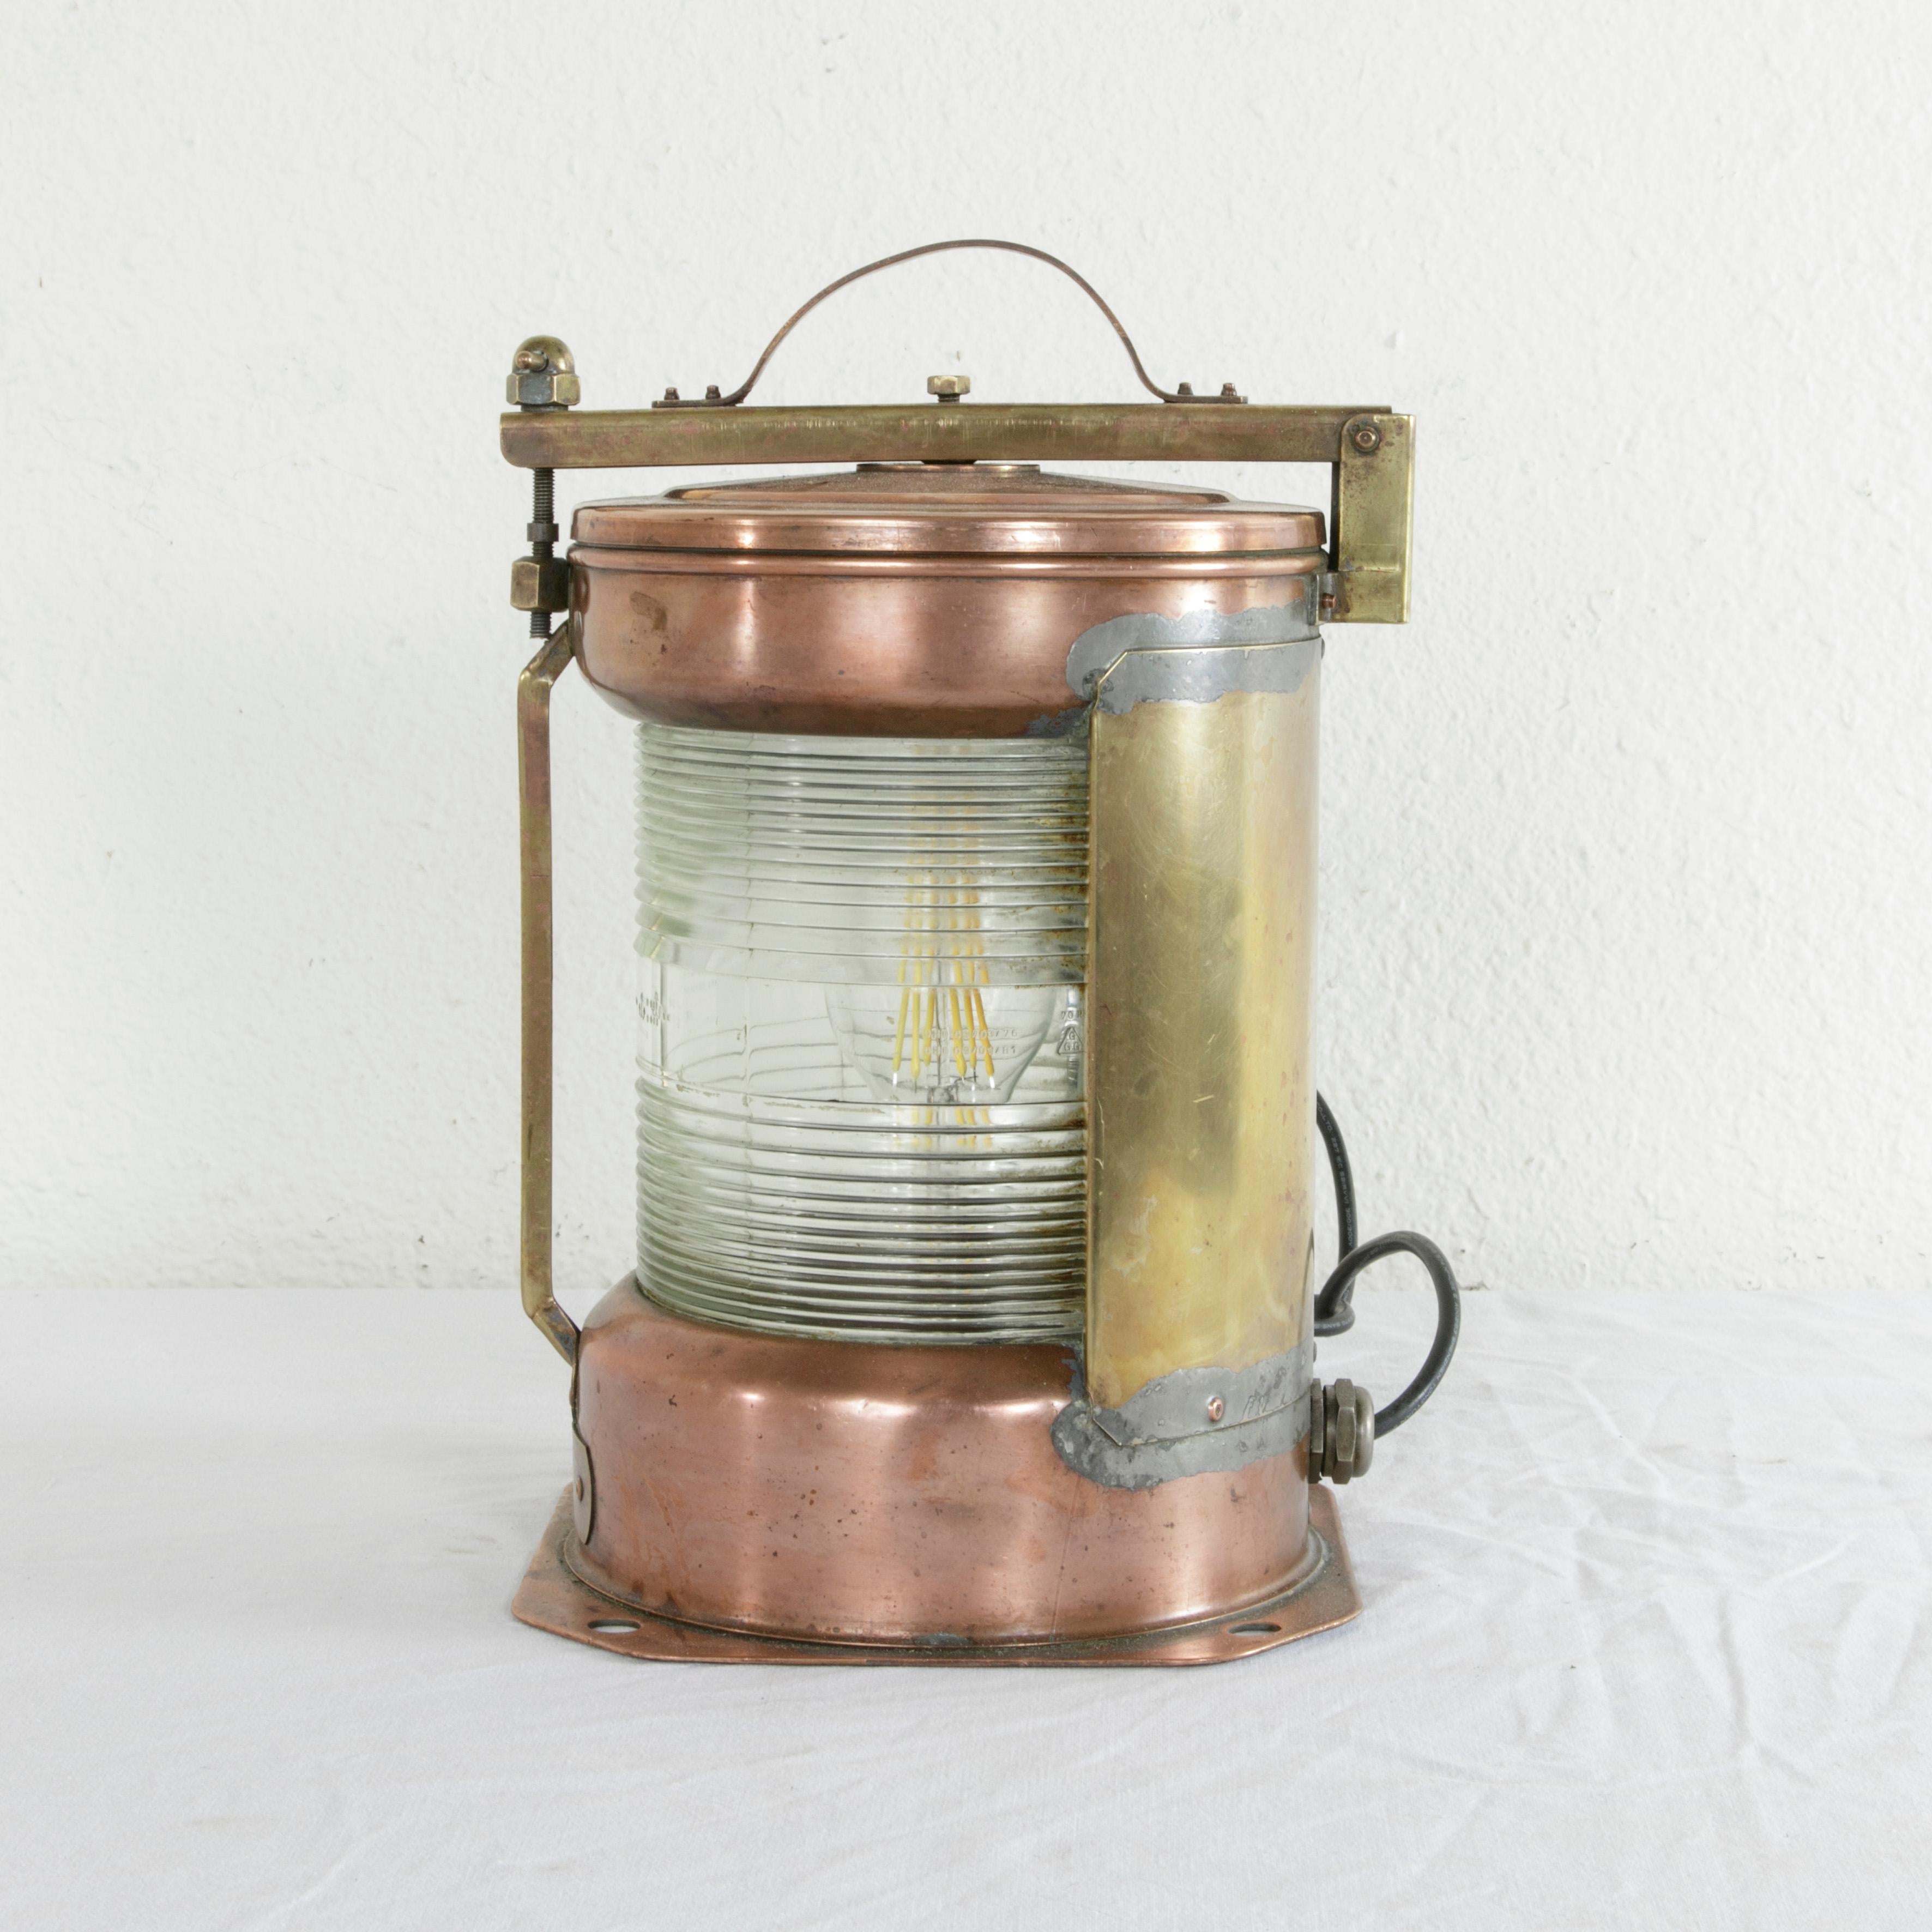 English Copper Marine Lantern with Engraved Brass Masthead Label, Electrified 1